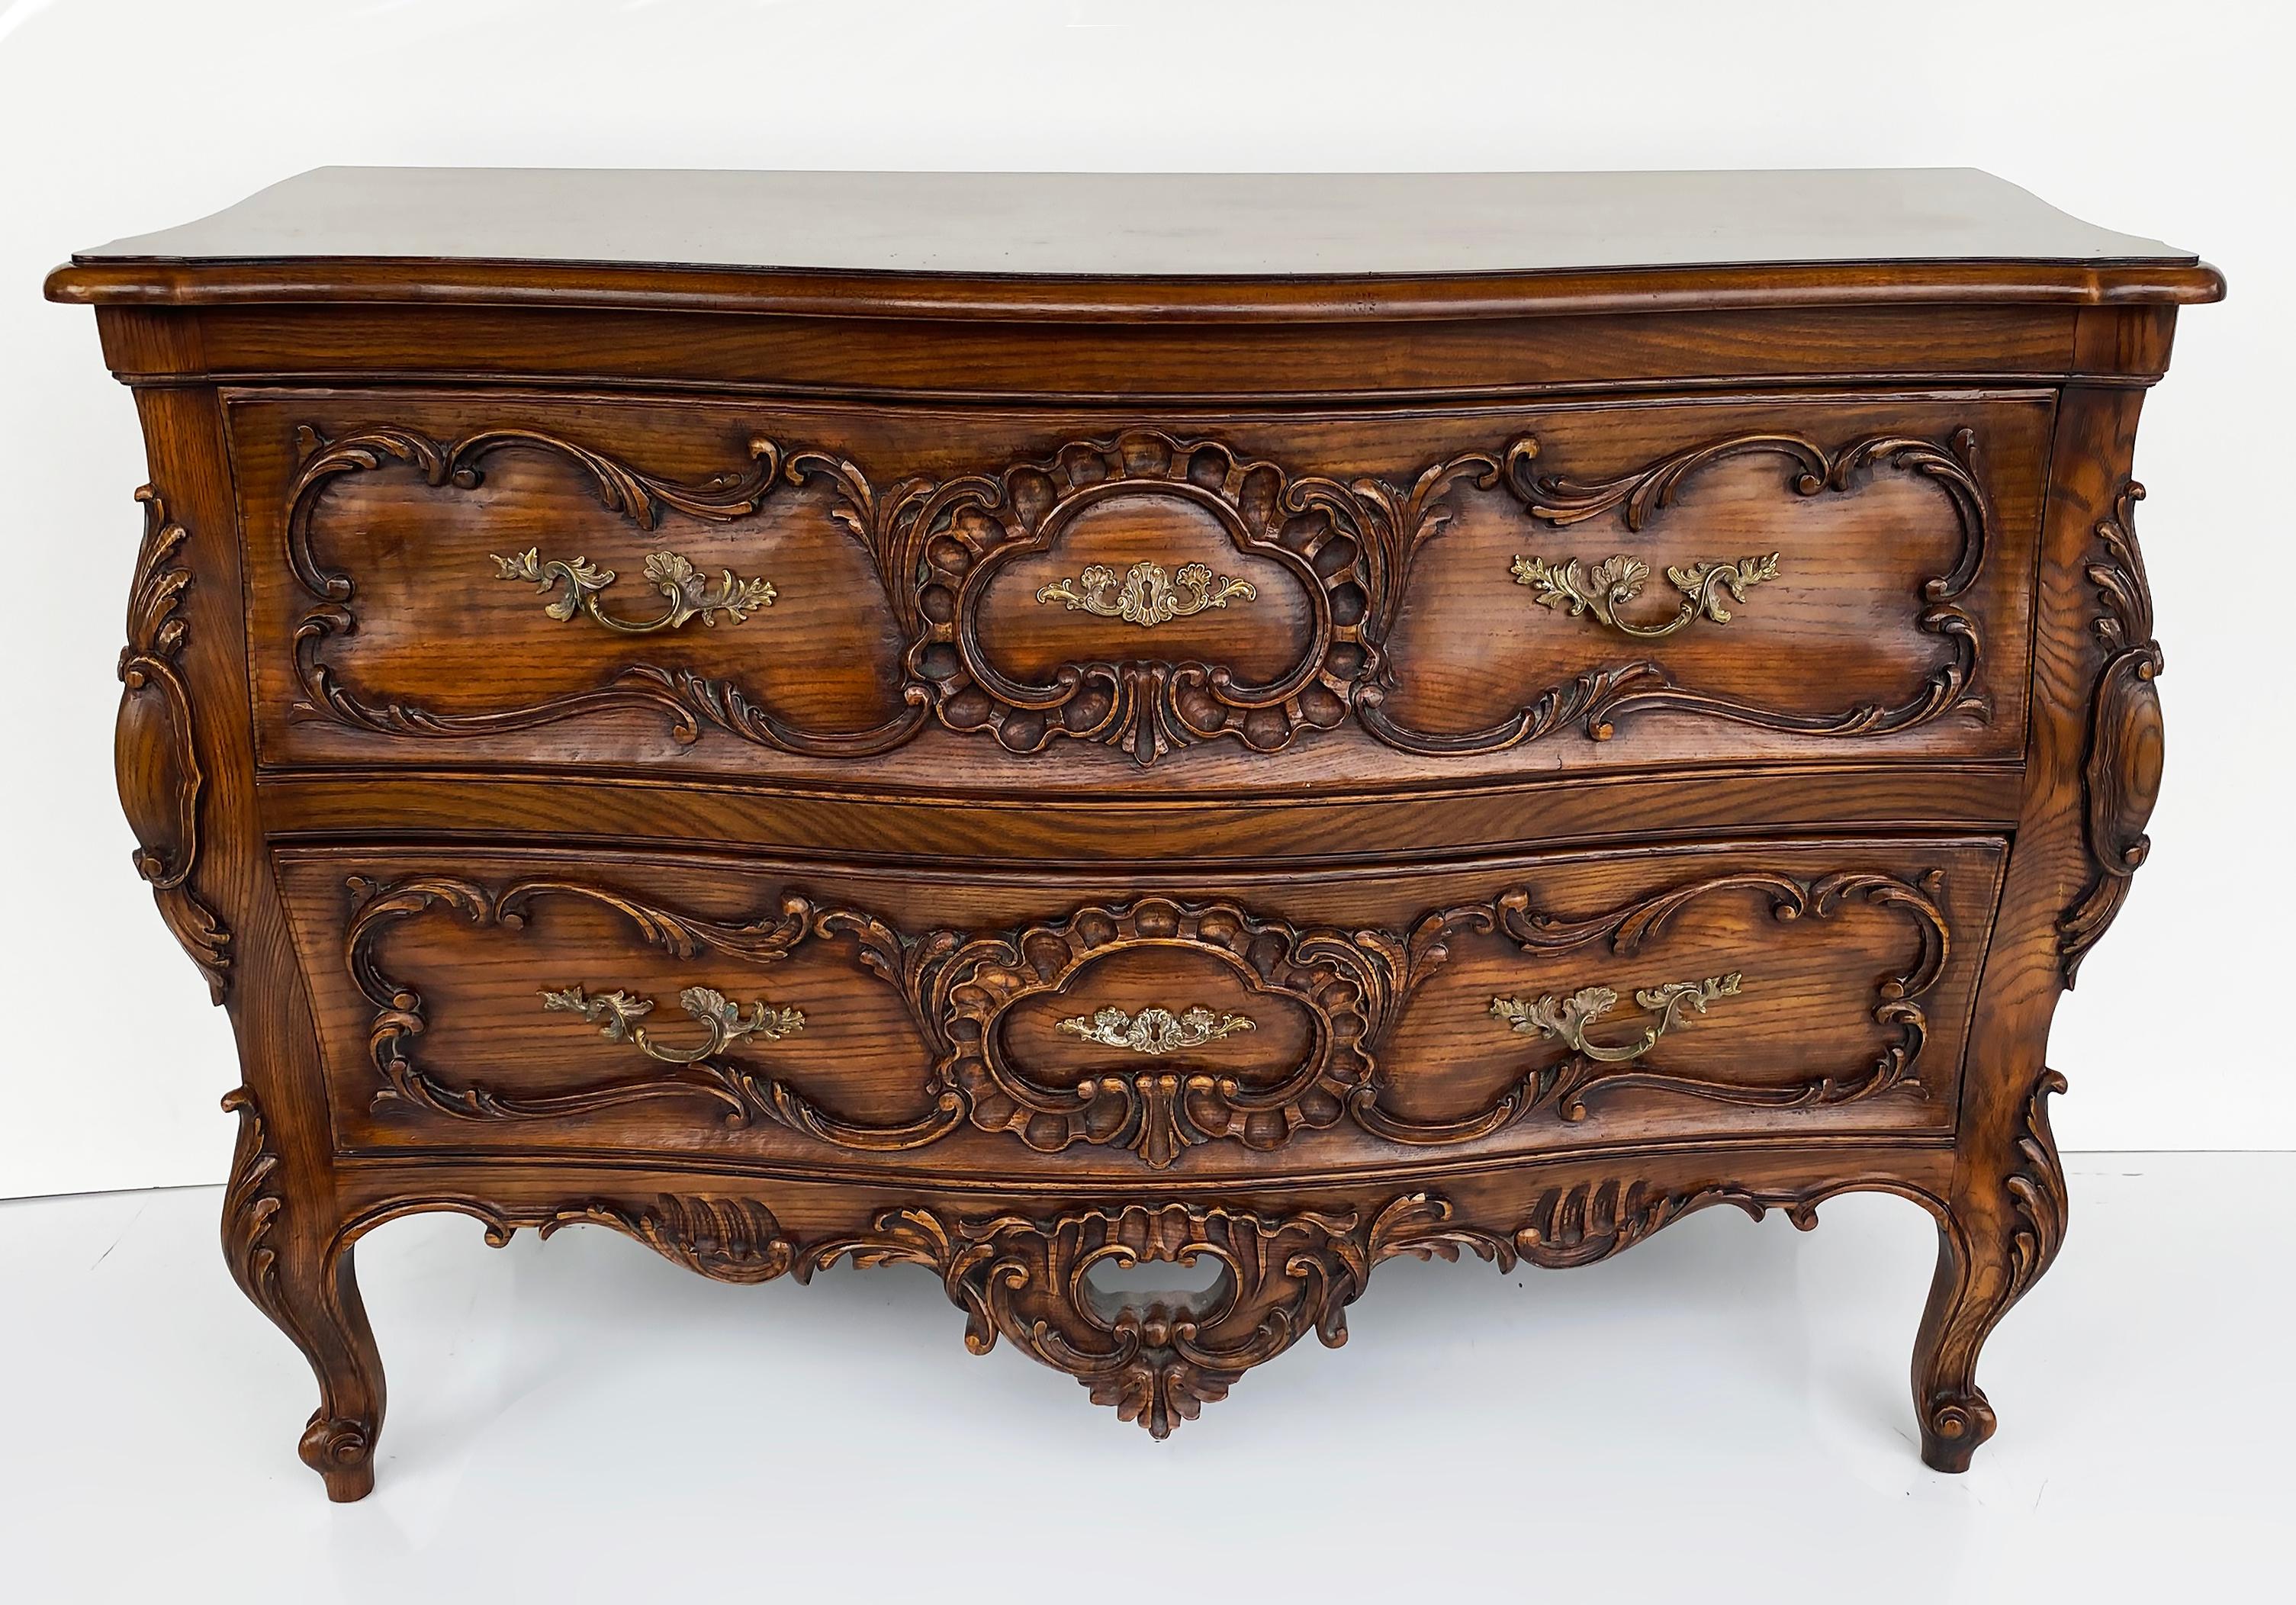 Karges Louis XV Bombe Serpentine Bowfront Chest of Drawers in Walnut, Late 20thC

Offered for sale is a late 20th-century Karges Furniture Company Louis XV Bombe Chest Inspired by a metropolitan Paris piece, ca. 1755.  This chest employs low-relief